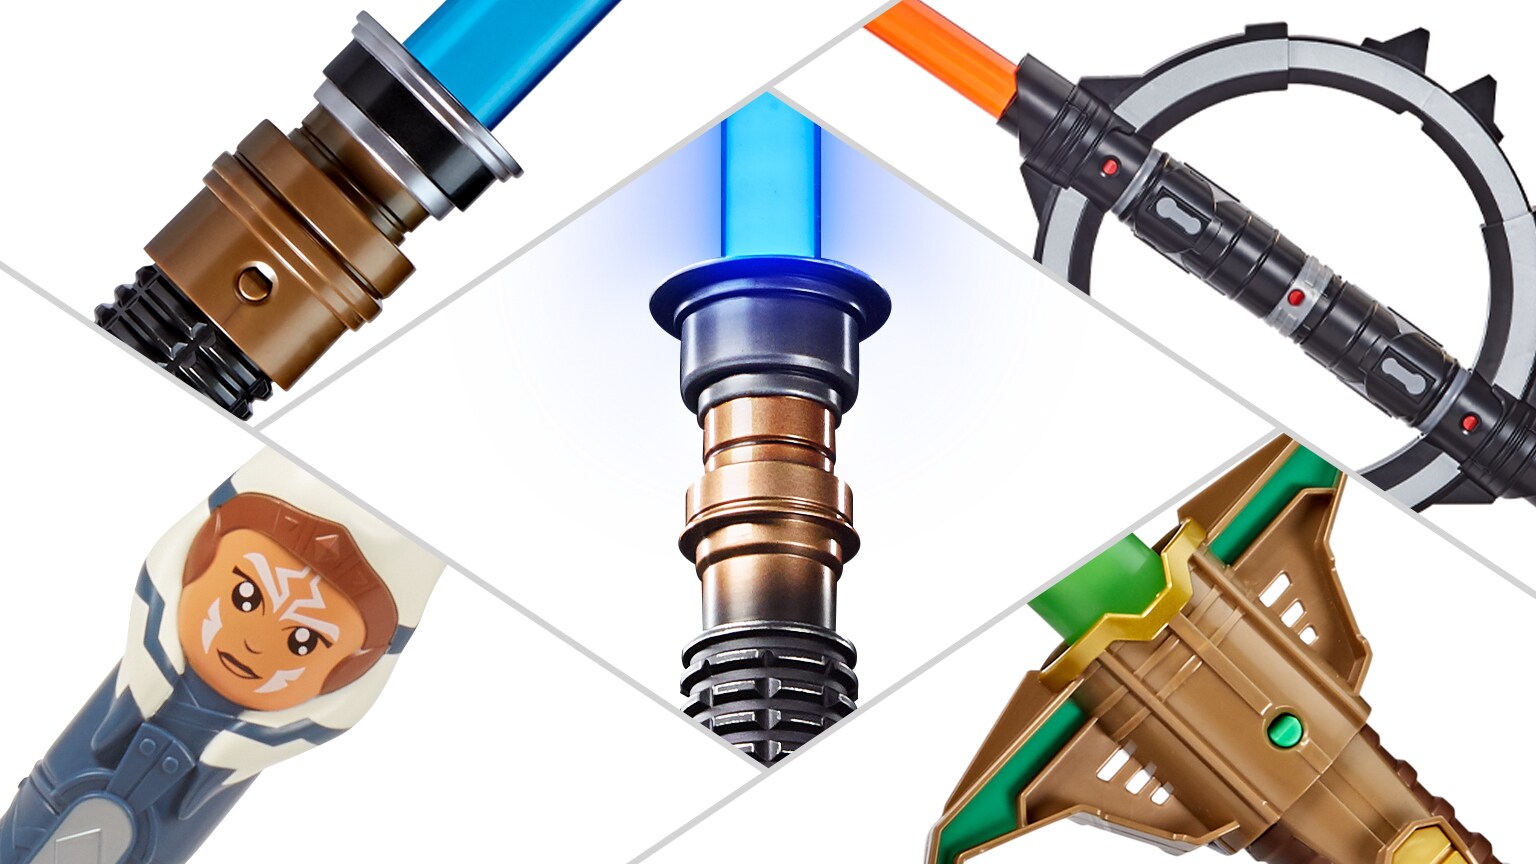 5 Modern Toy and Collectible Lightsabers to Channel Your Inner Jedi (or Sith)